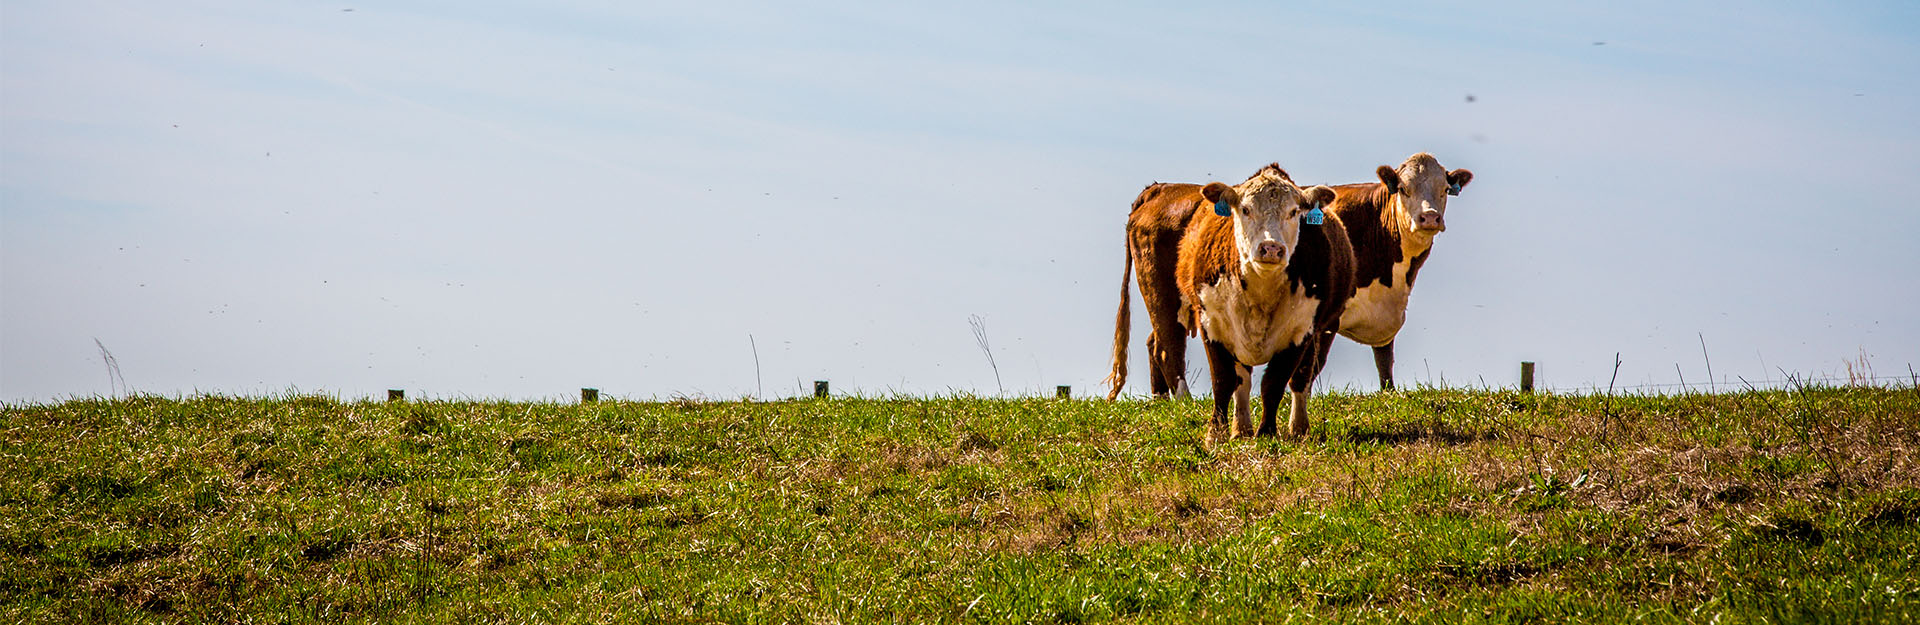 cow standing in pasture